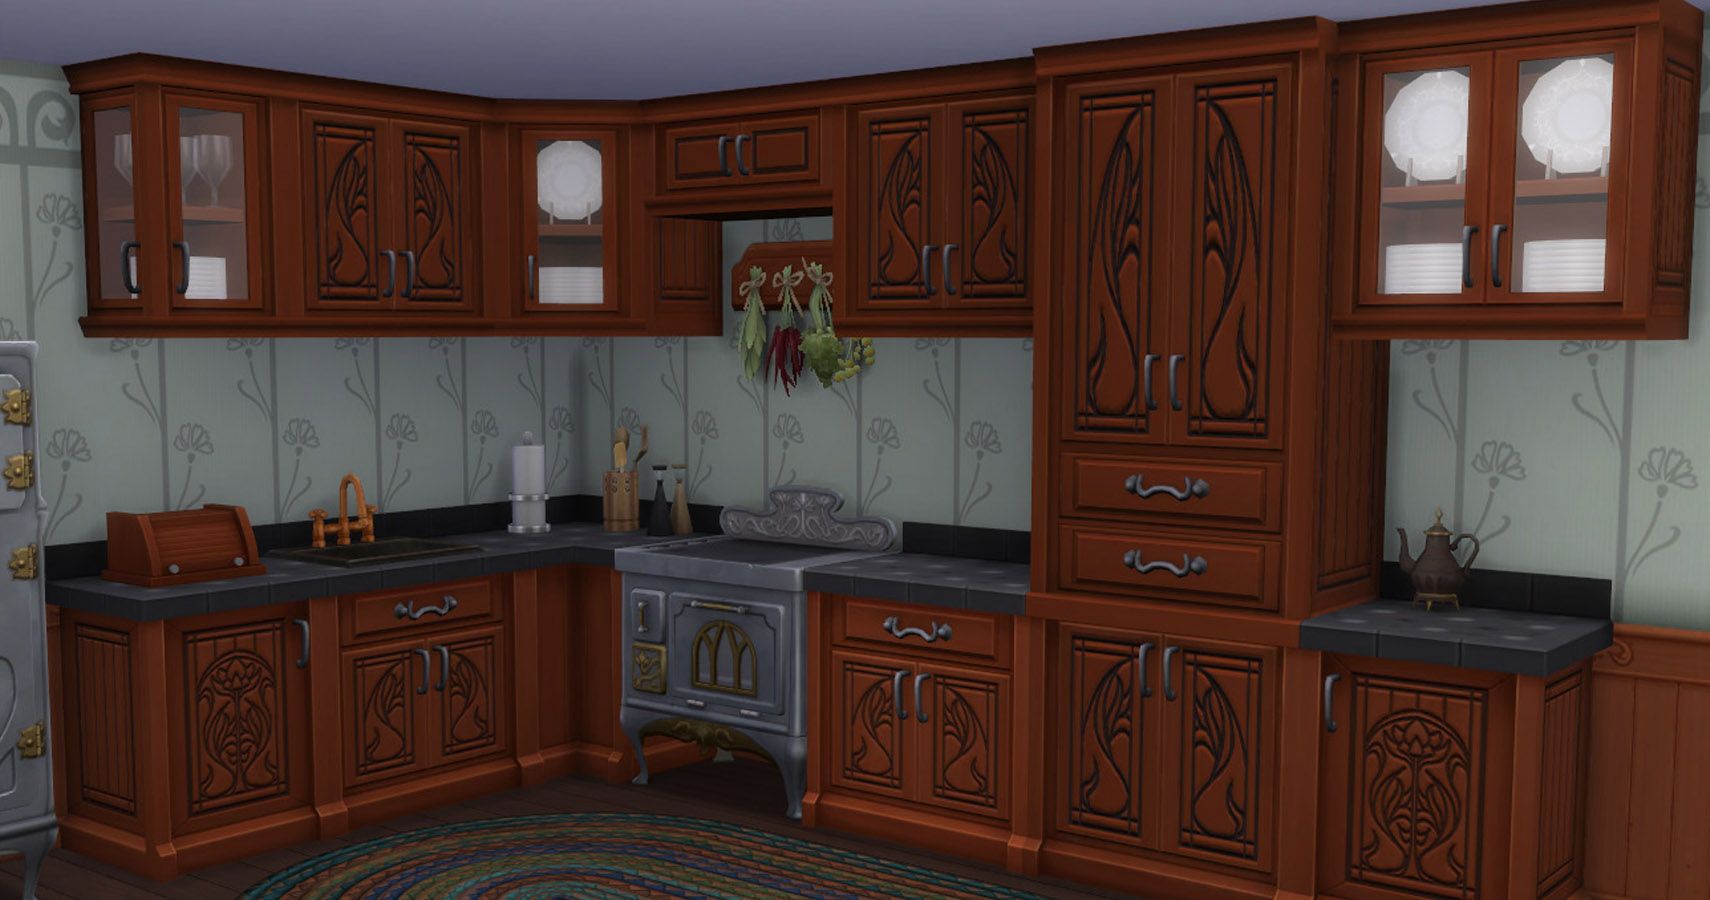 The realm of magic kitchen units with wall cupboards above them along 2 walls.